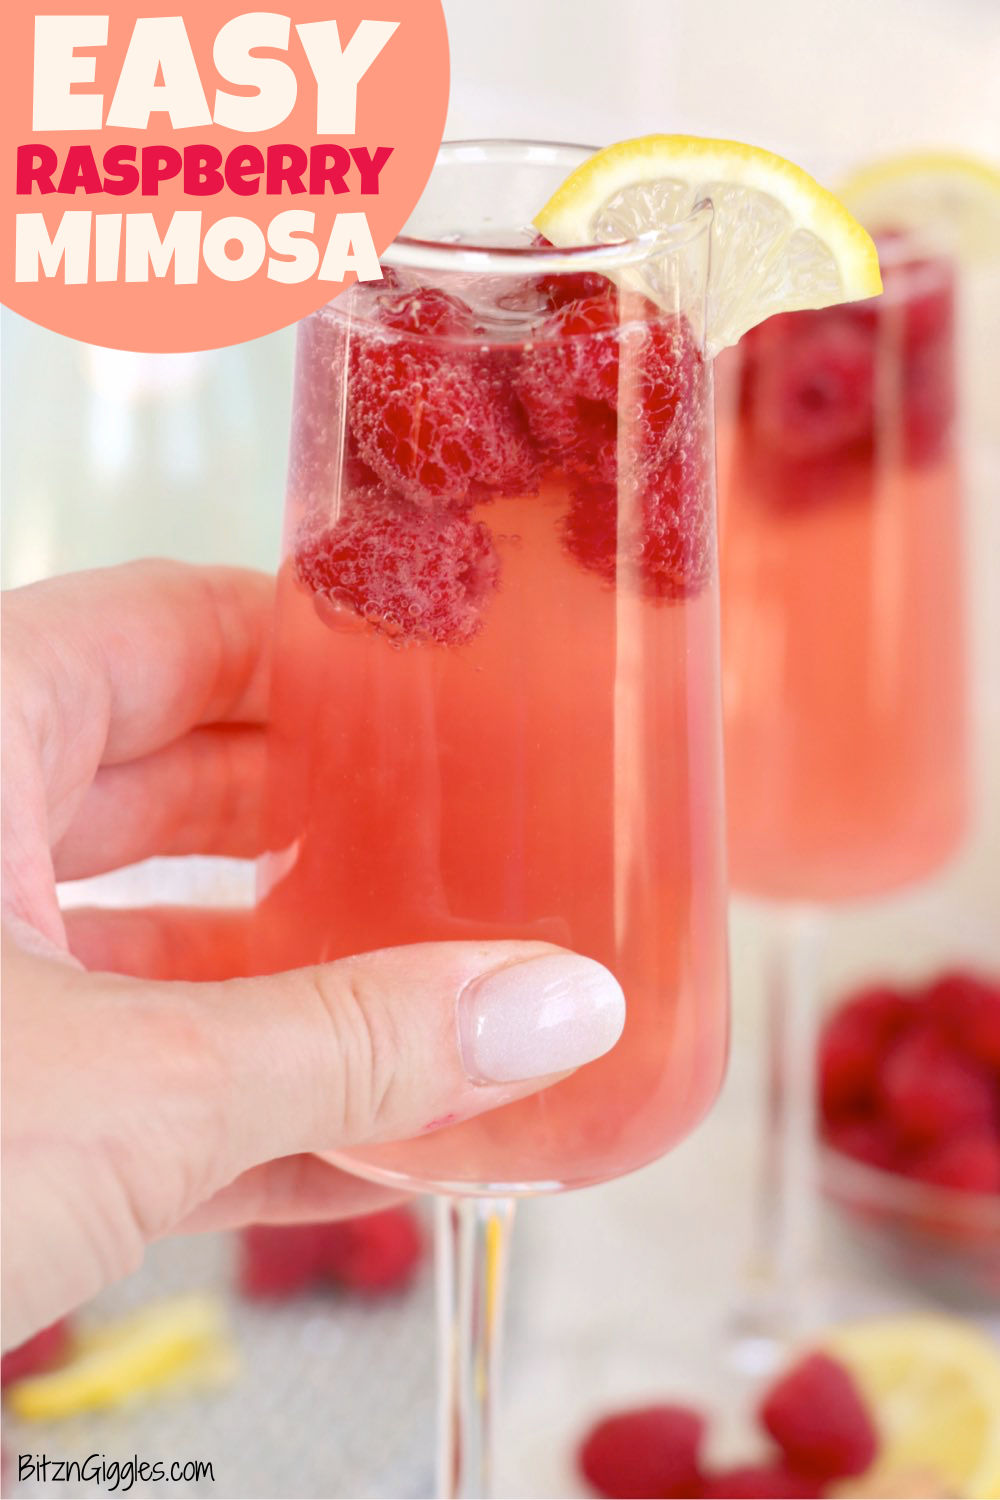 hand holding a flute glass of raspberry mimosa with raspberries and a lemon as garnish.